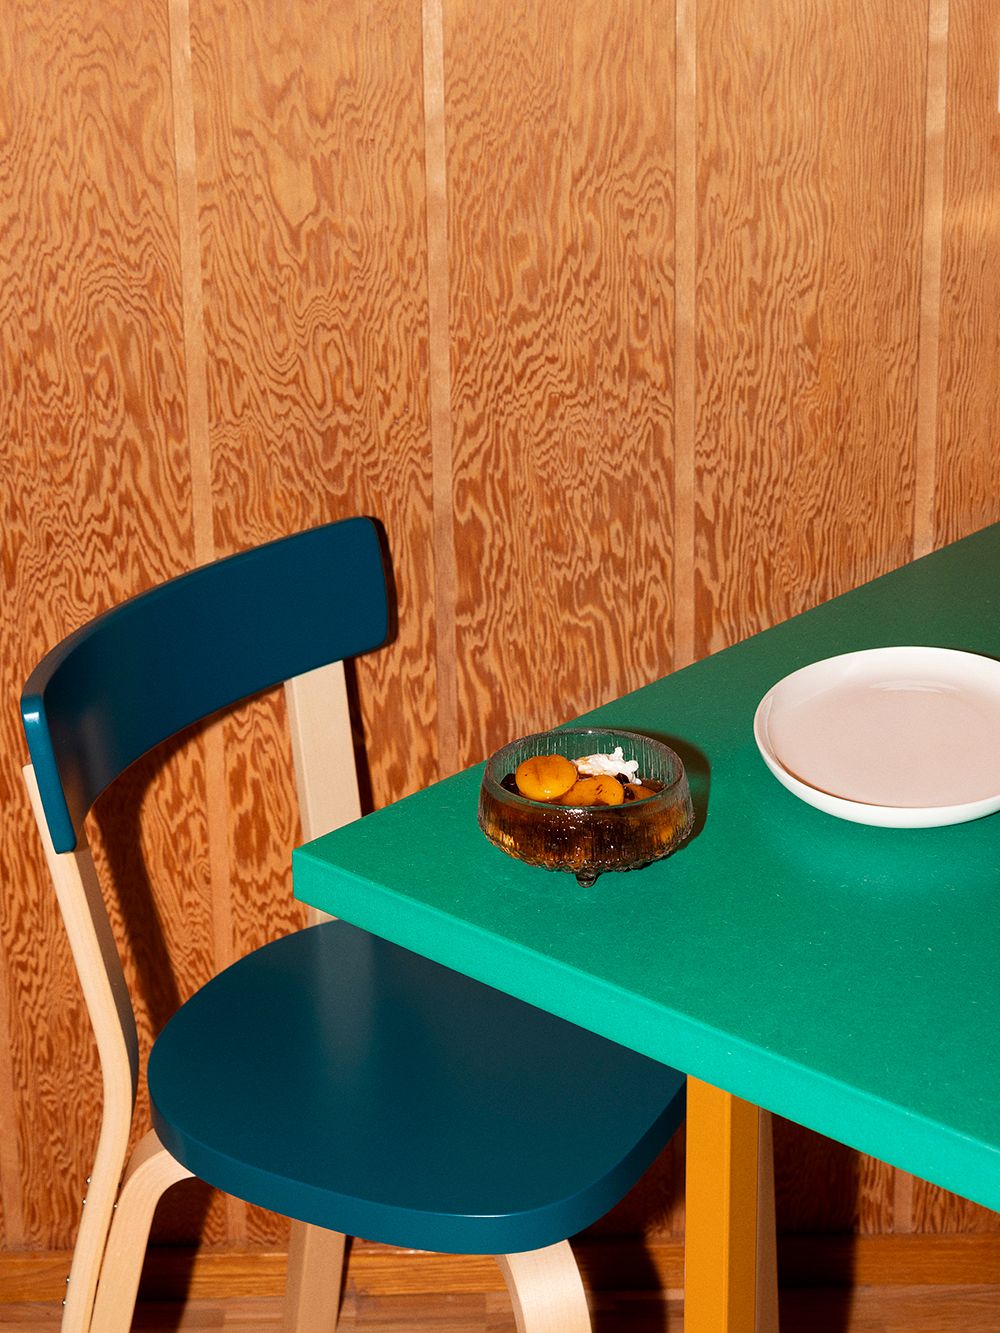 An image featuring Artek's Aalto chair 69 in a petrol shade and an Ultima Thule bowl on a table.